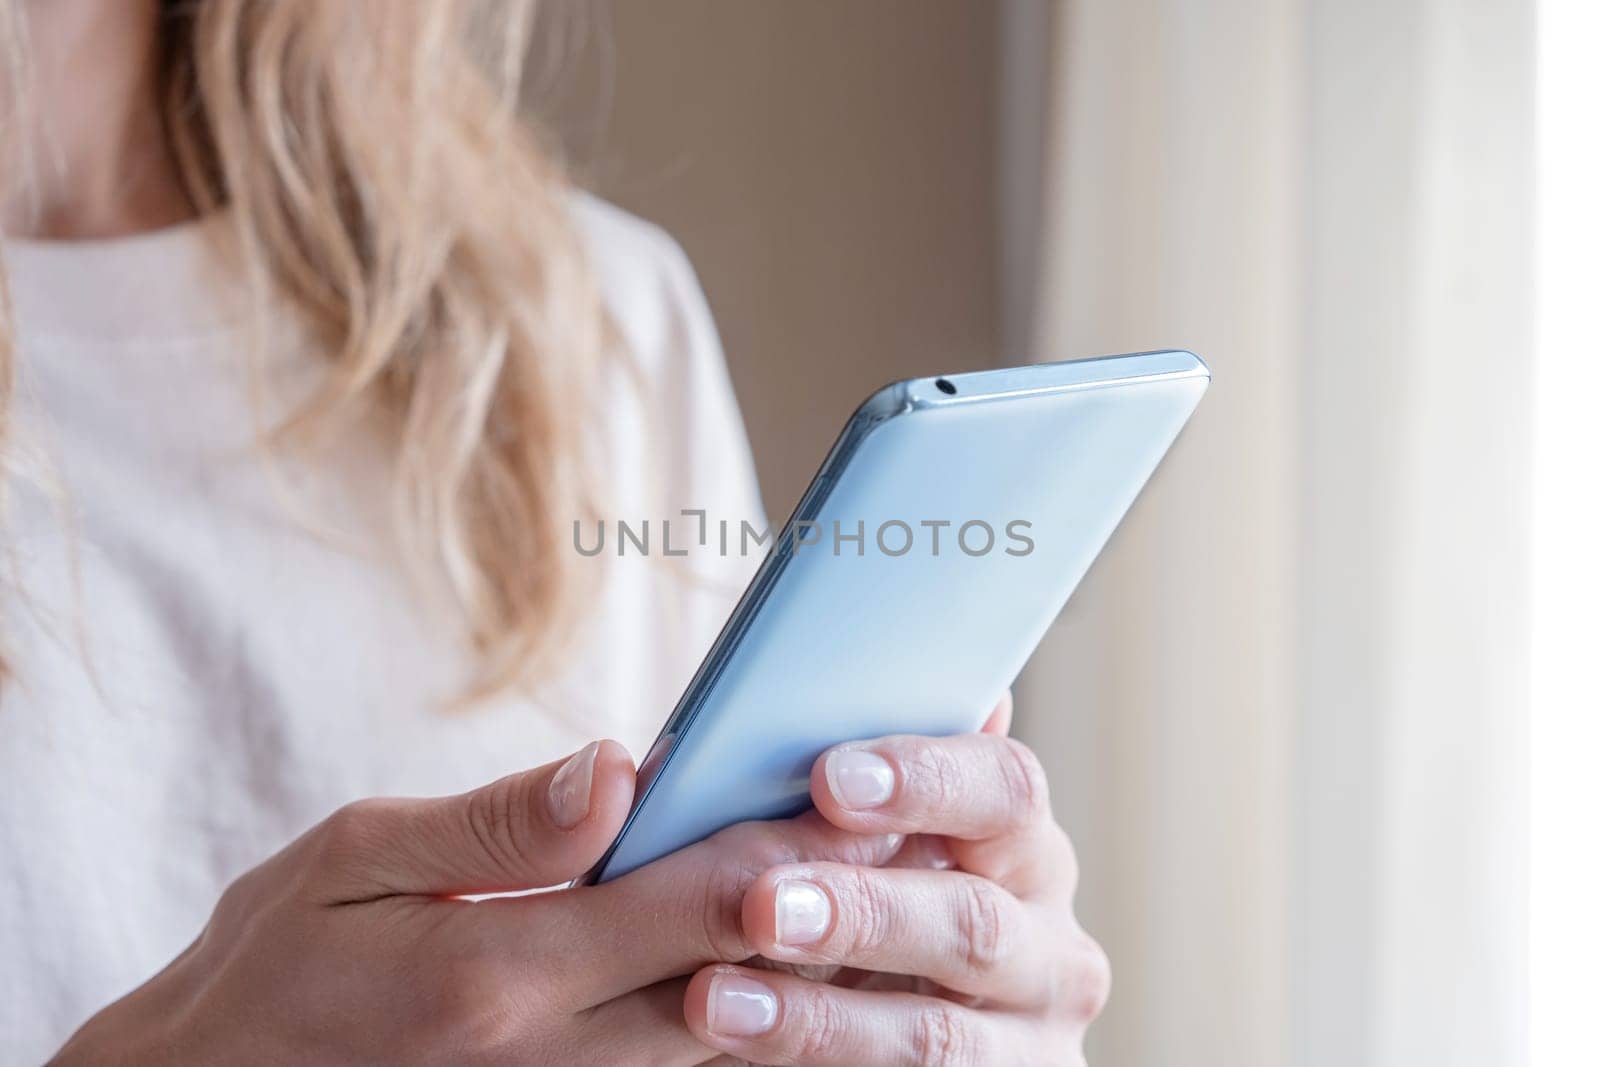 closeup of unrecognizable person in home clothes using phone standing by the window in hotel room